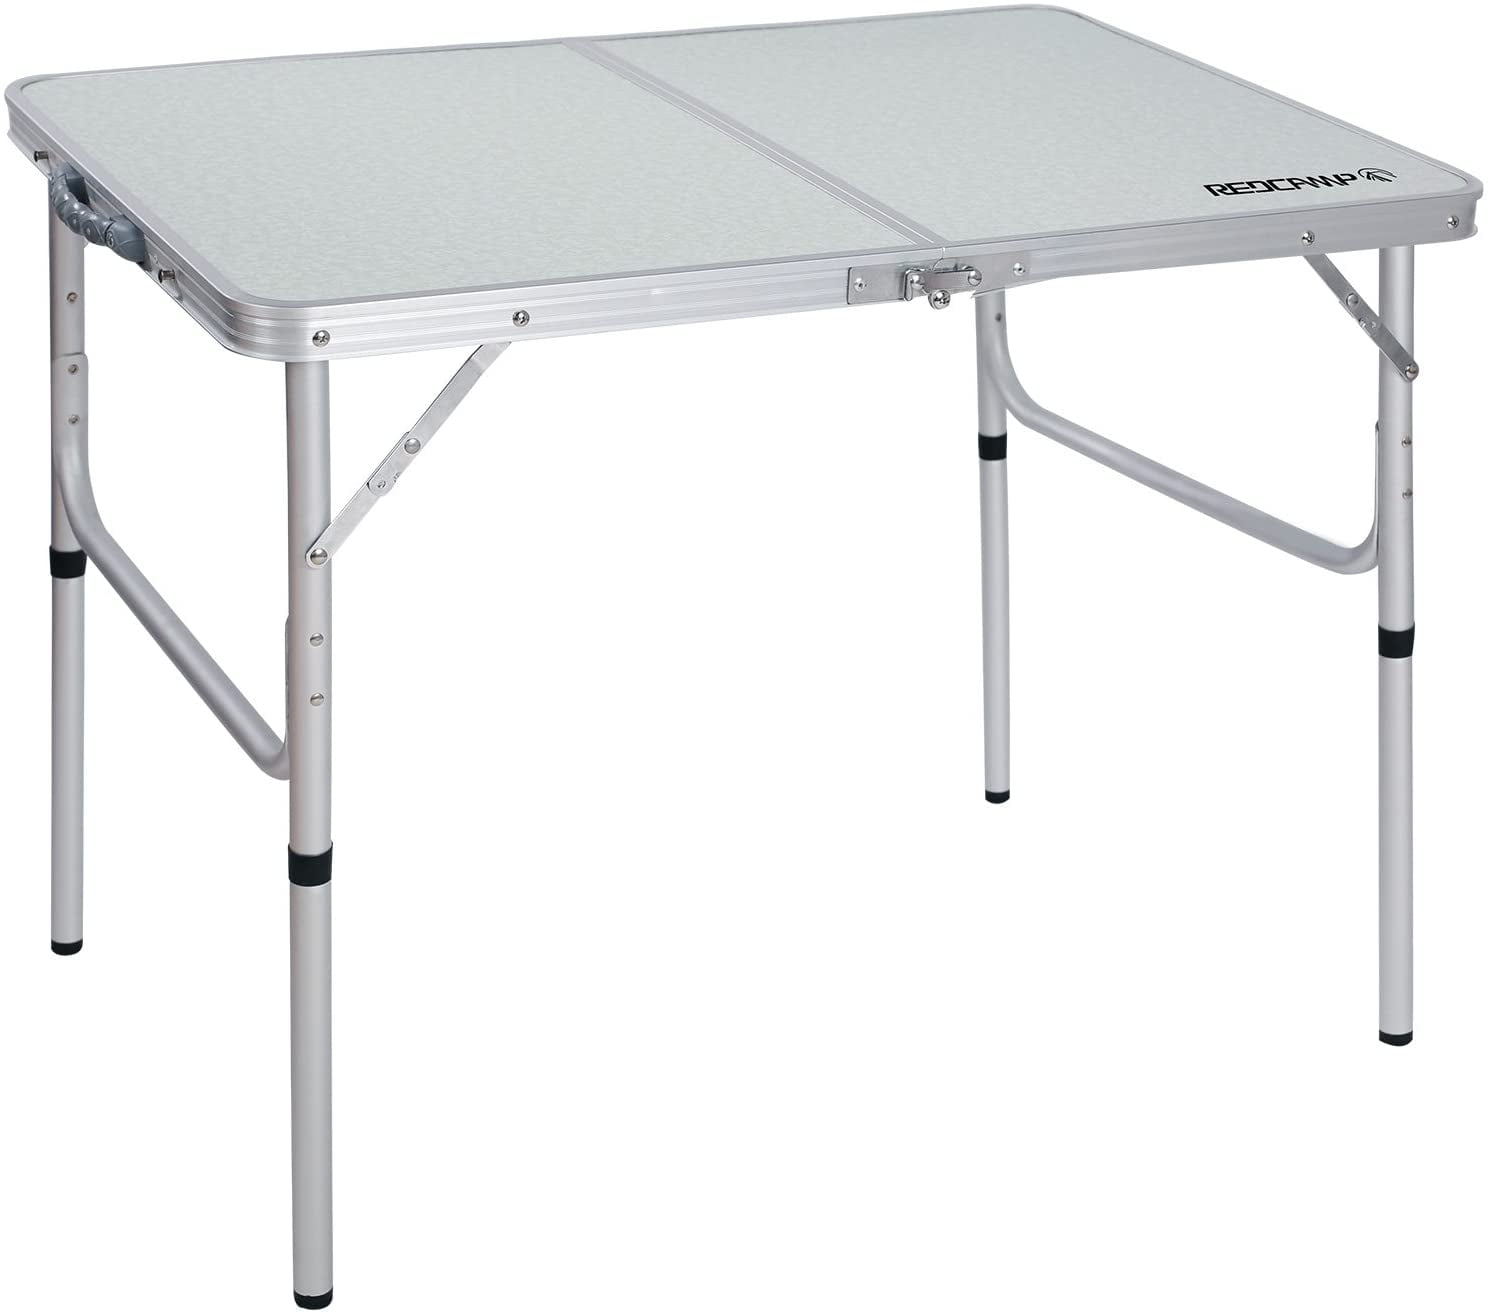 REDCAMP Aluminum Folding Table 3 Foot, Adjustable Height Lightweight  Portable Camping Table for Picnic Beach Outdoor Indoor, White 36 x 24 inch